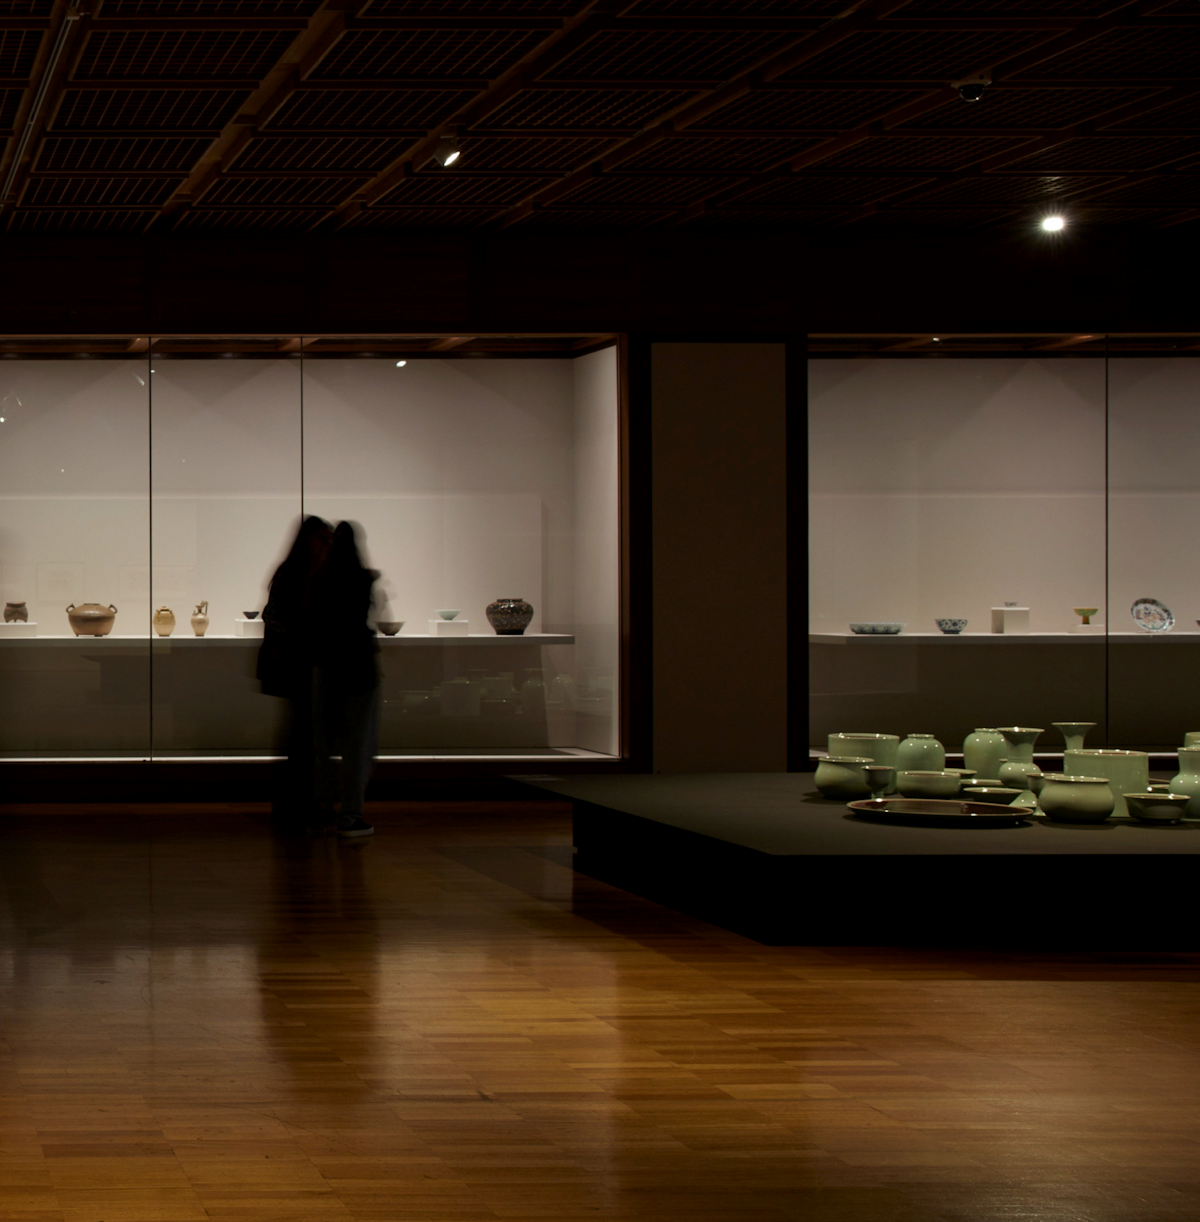 An installation view of ‘The Way We Eat’ exhibition, Art Gallery of New South Wales. Photo © AGNSW, Jenni Carter